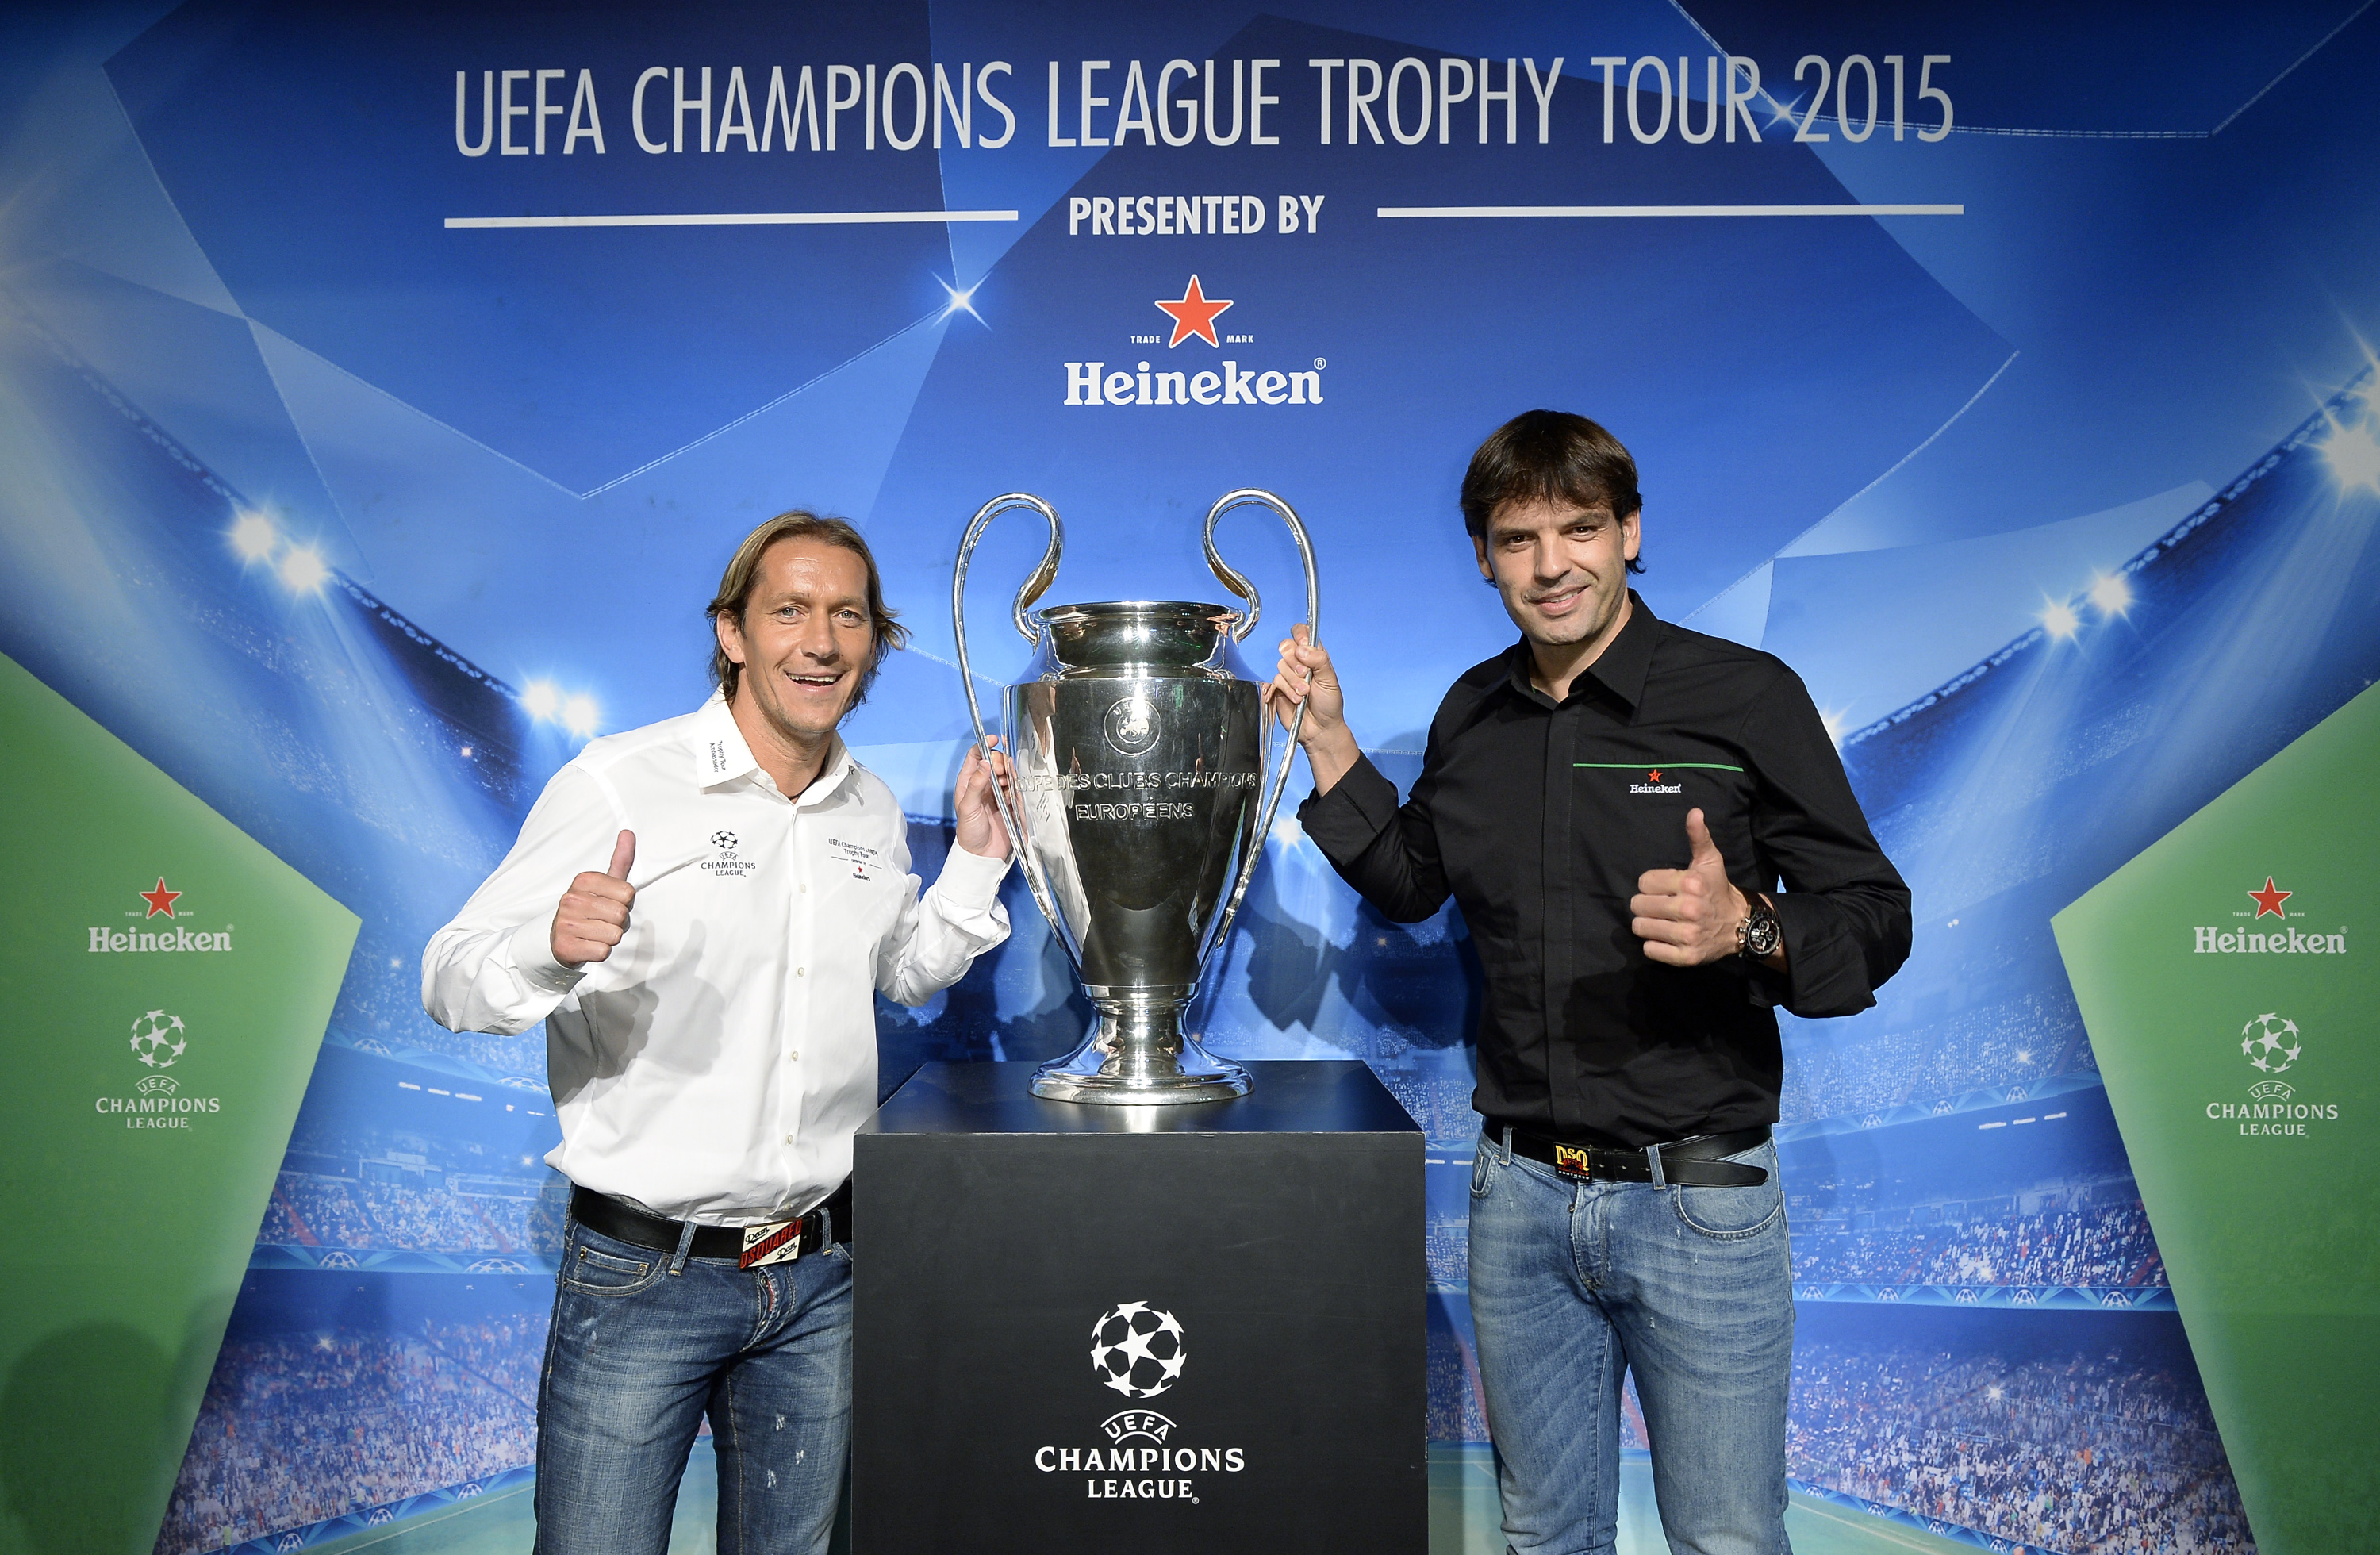 LOS ANGELES, CA - APRIL 21: Spanish retired footballer Michel Salgado (L), two time Champions League winner with Real Madrid, and Spanish footballer Fernando Morientes, who played for a number of clubs during his career including Real Madrid, pose with the UEFA Champions League Trophy during the VIP reception at Siren Studio during the UEFA Champions League Trophy Tour 2015 presented by Heineken April, 21, 2015, in Los Angeles, California. (Photo by Kevork Djansezian/Getty Images)